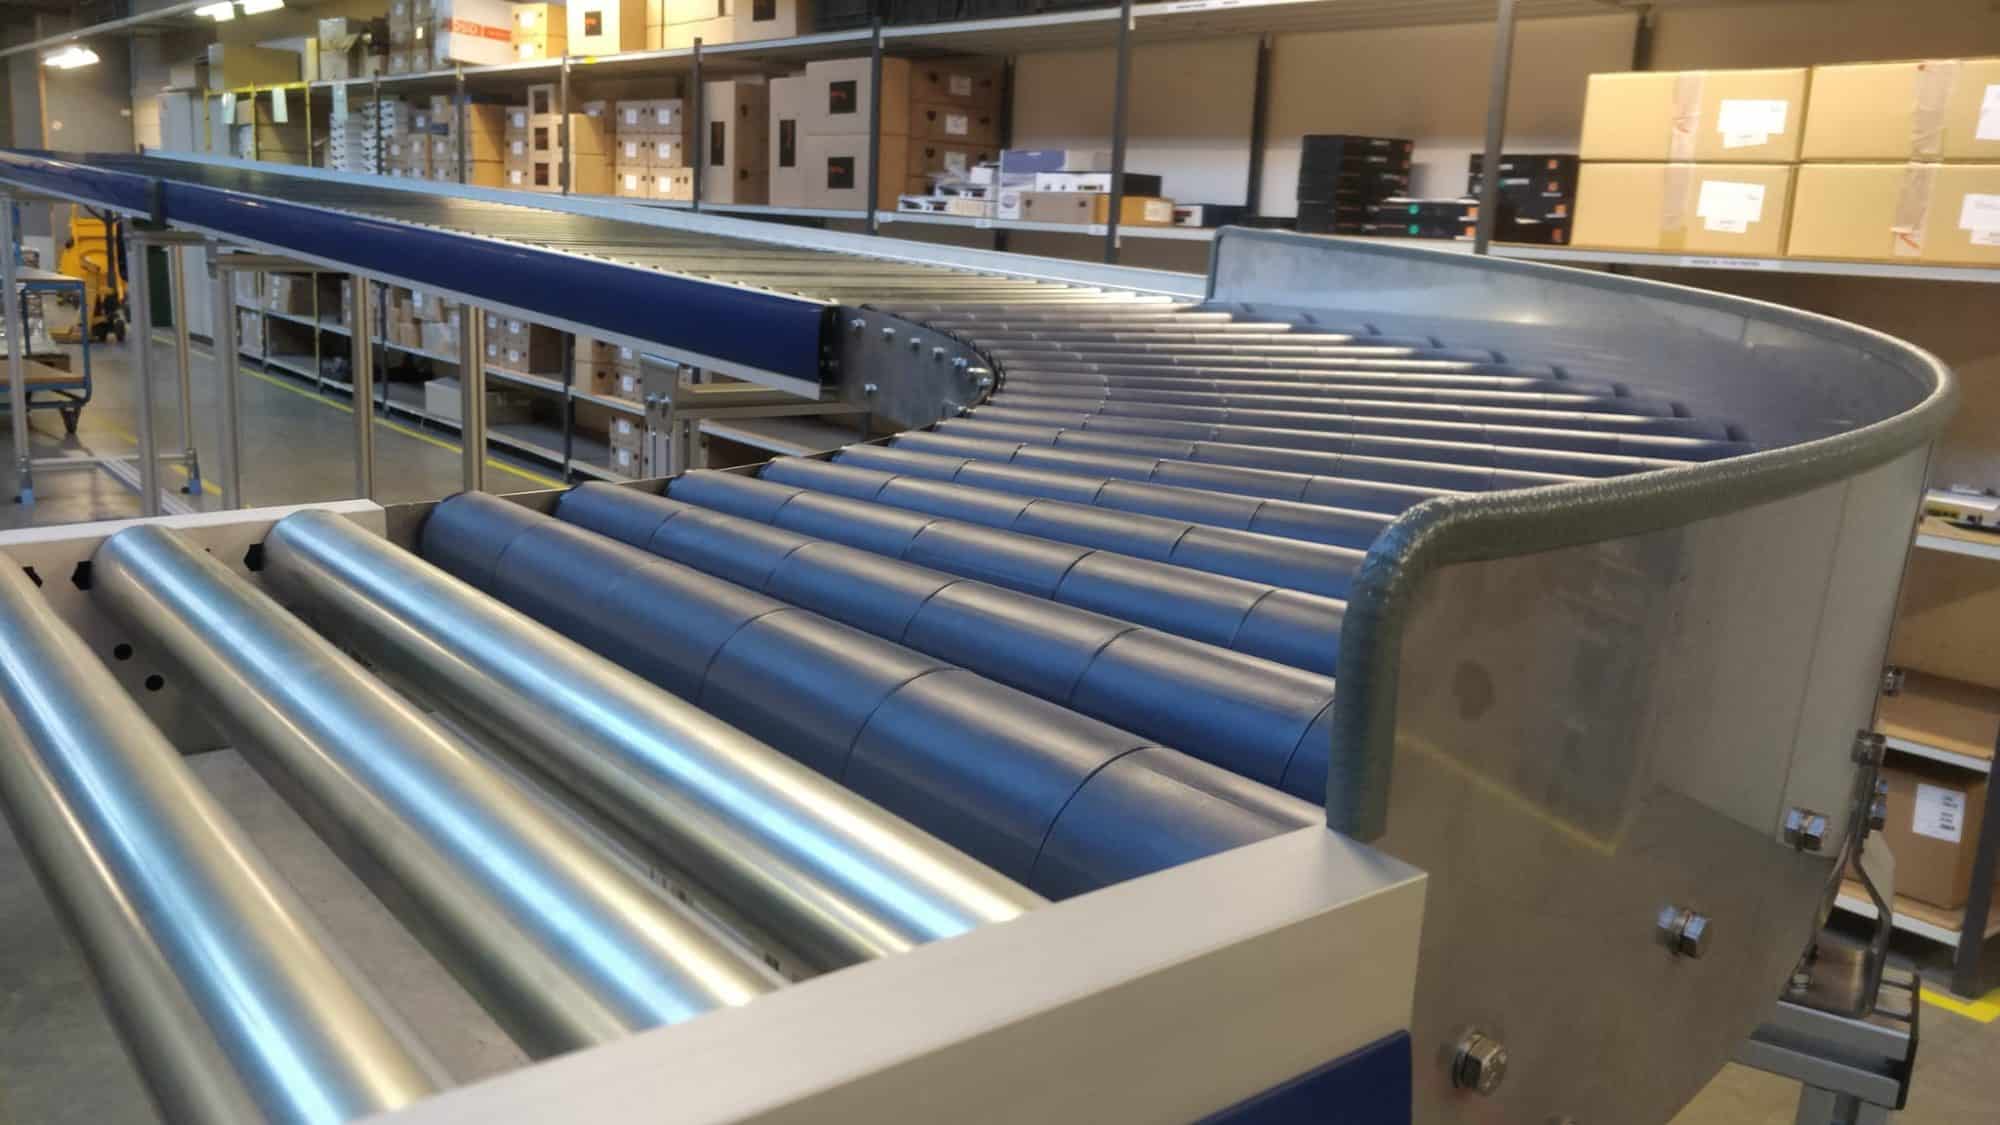 RCB roller conveyors that are making a curve.